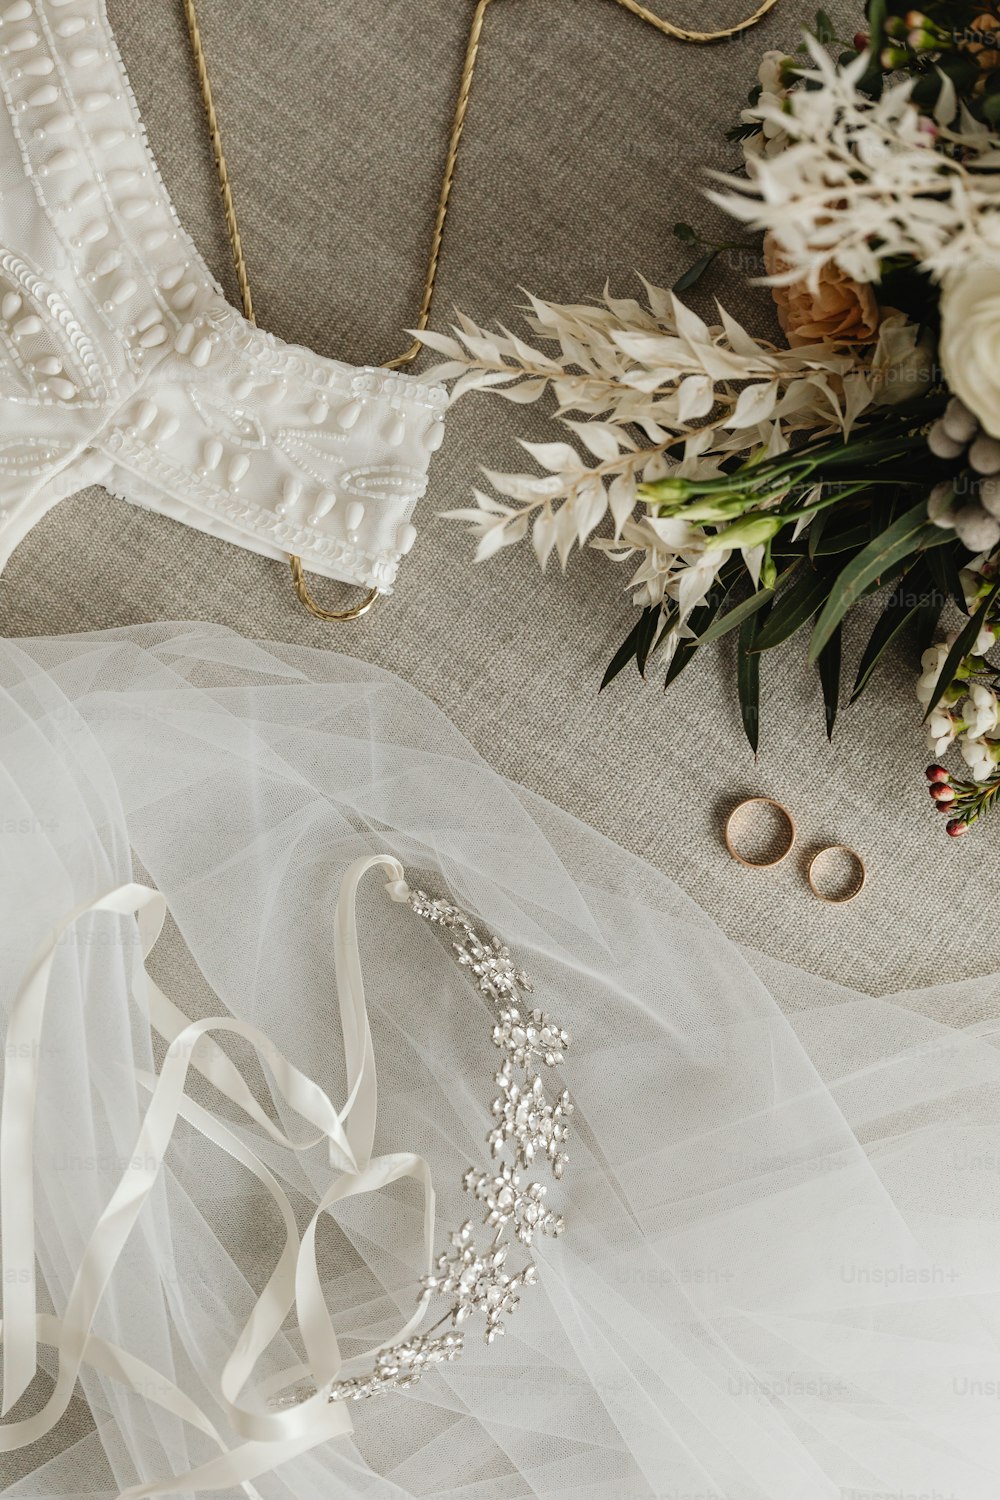 a bridal dress and wedding accessories on a table